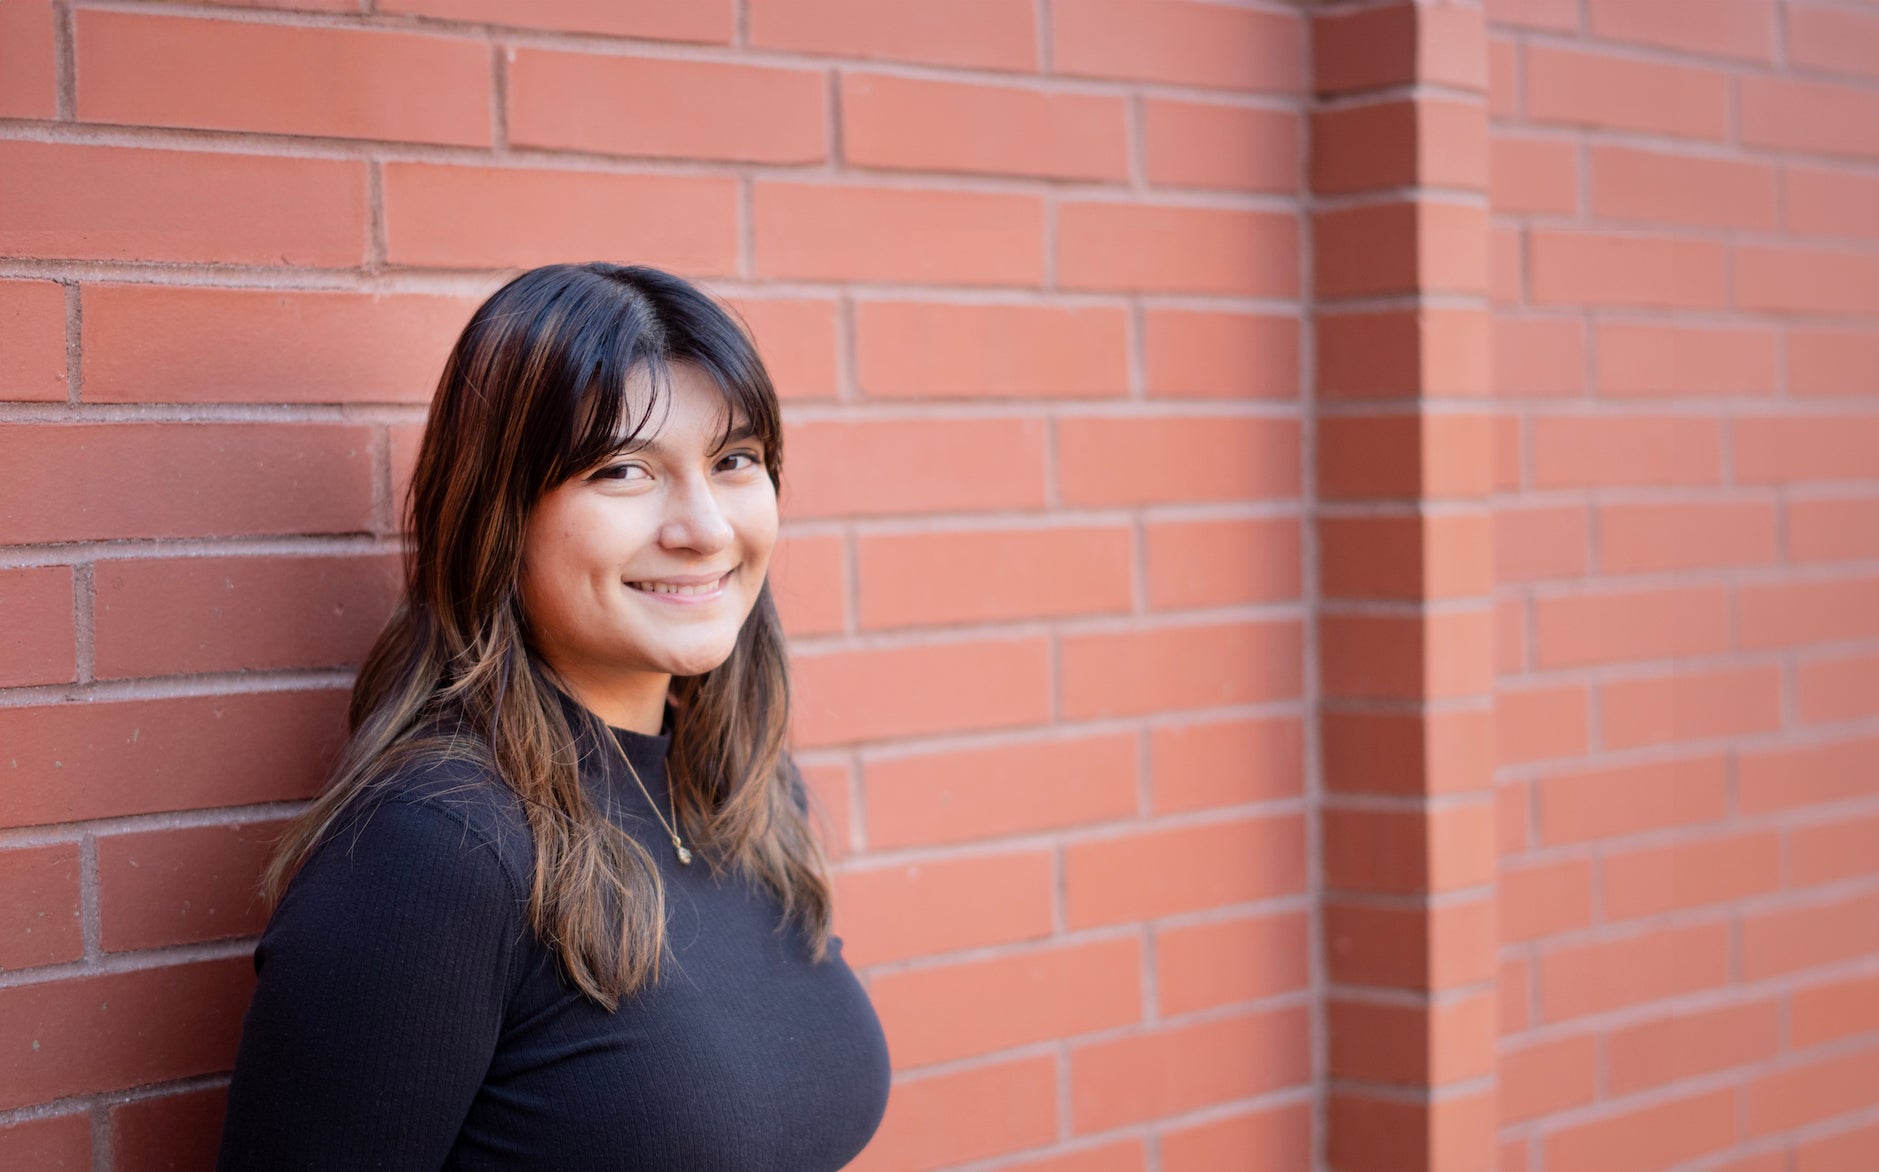 Samantha Delgado, smiling and leaning against a red brick wall